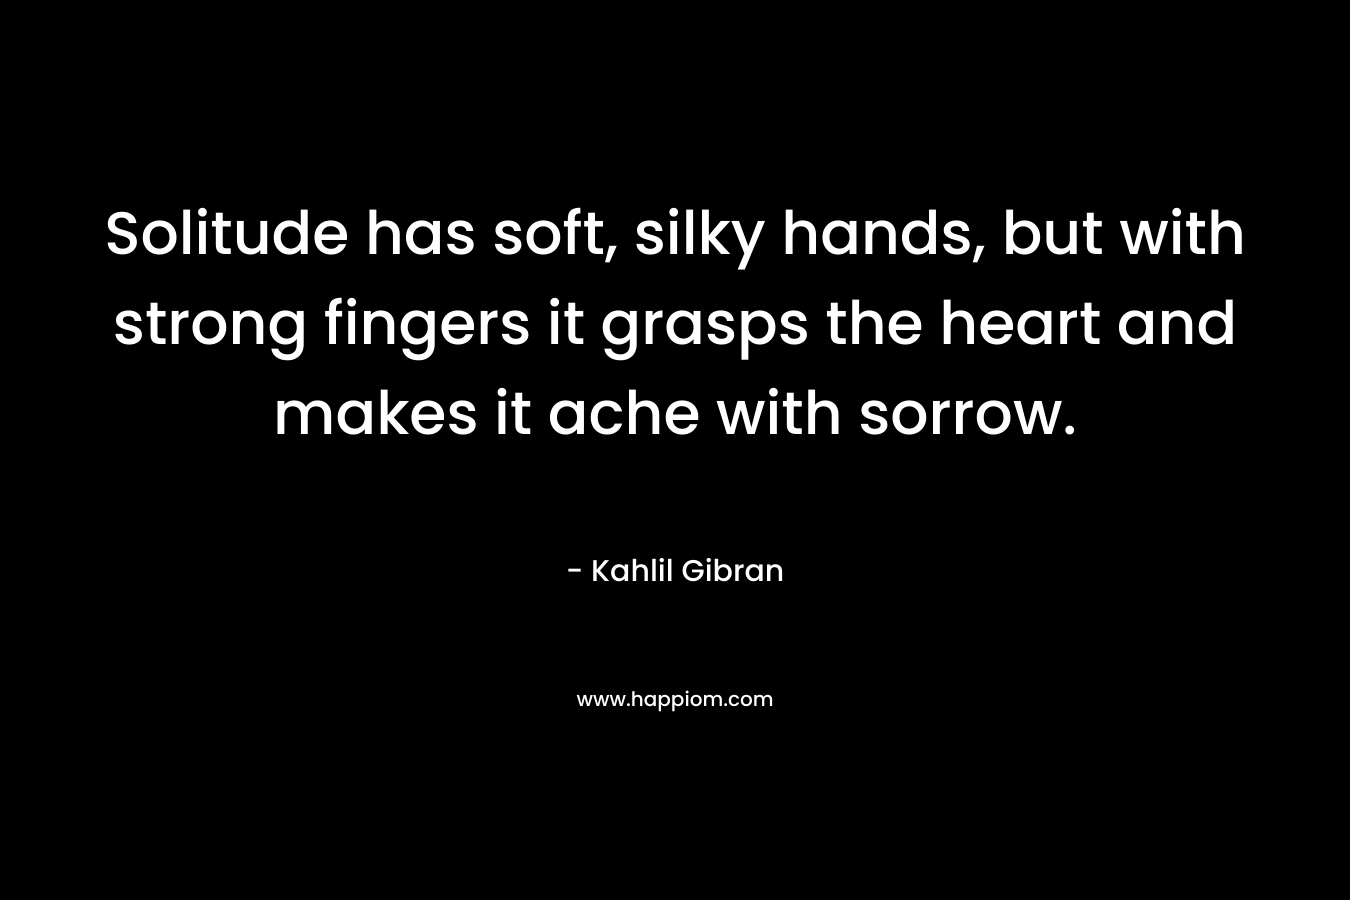 Solitude has soft, silky hands, but with strong fingers it grasps the heart and makes it ache with sorrow.